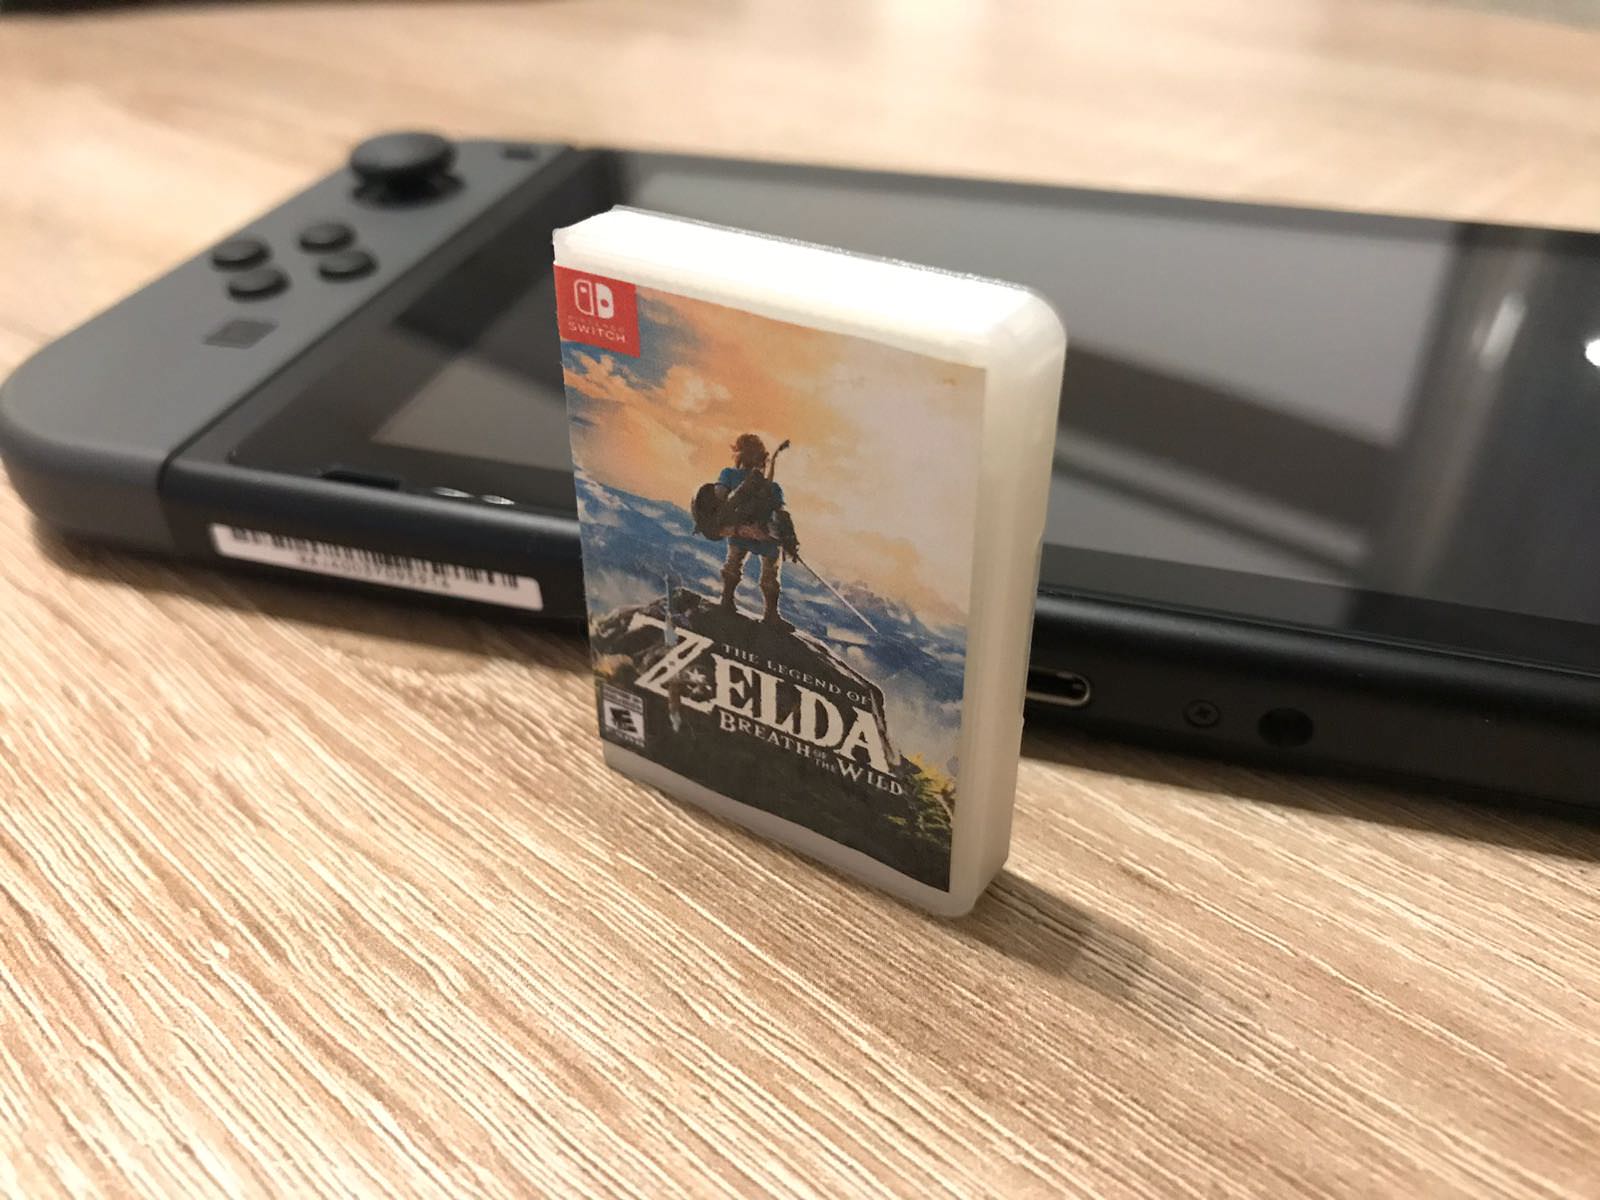 3D Print This Nintendo Switch At Home – NintendoSoup